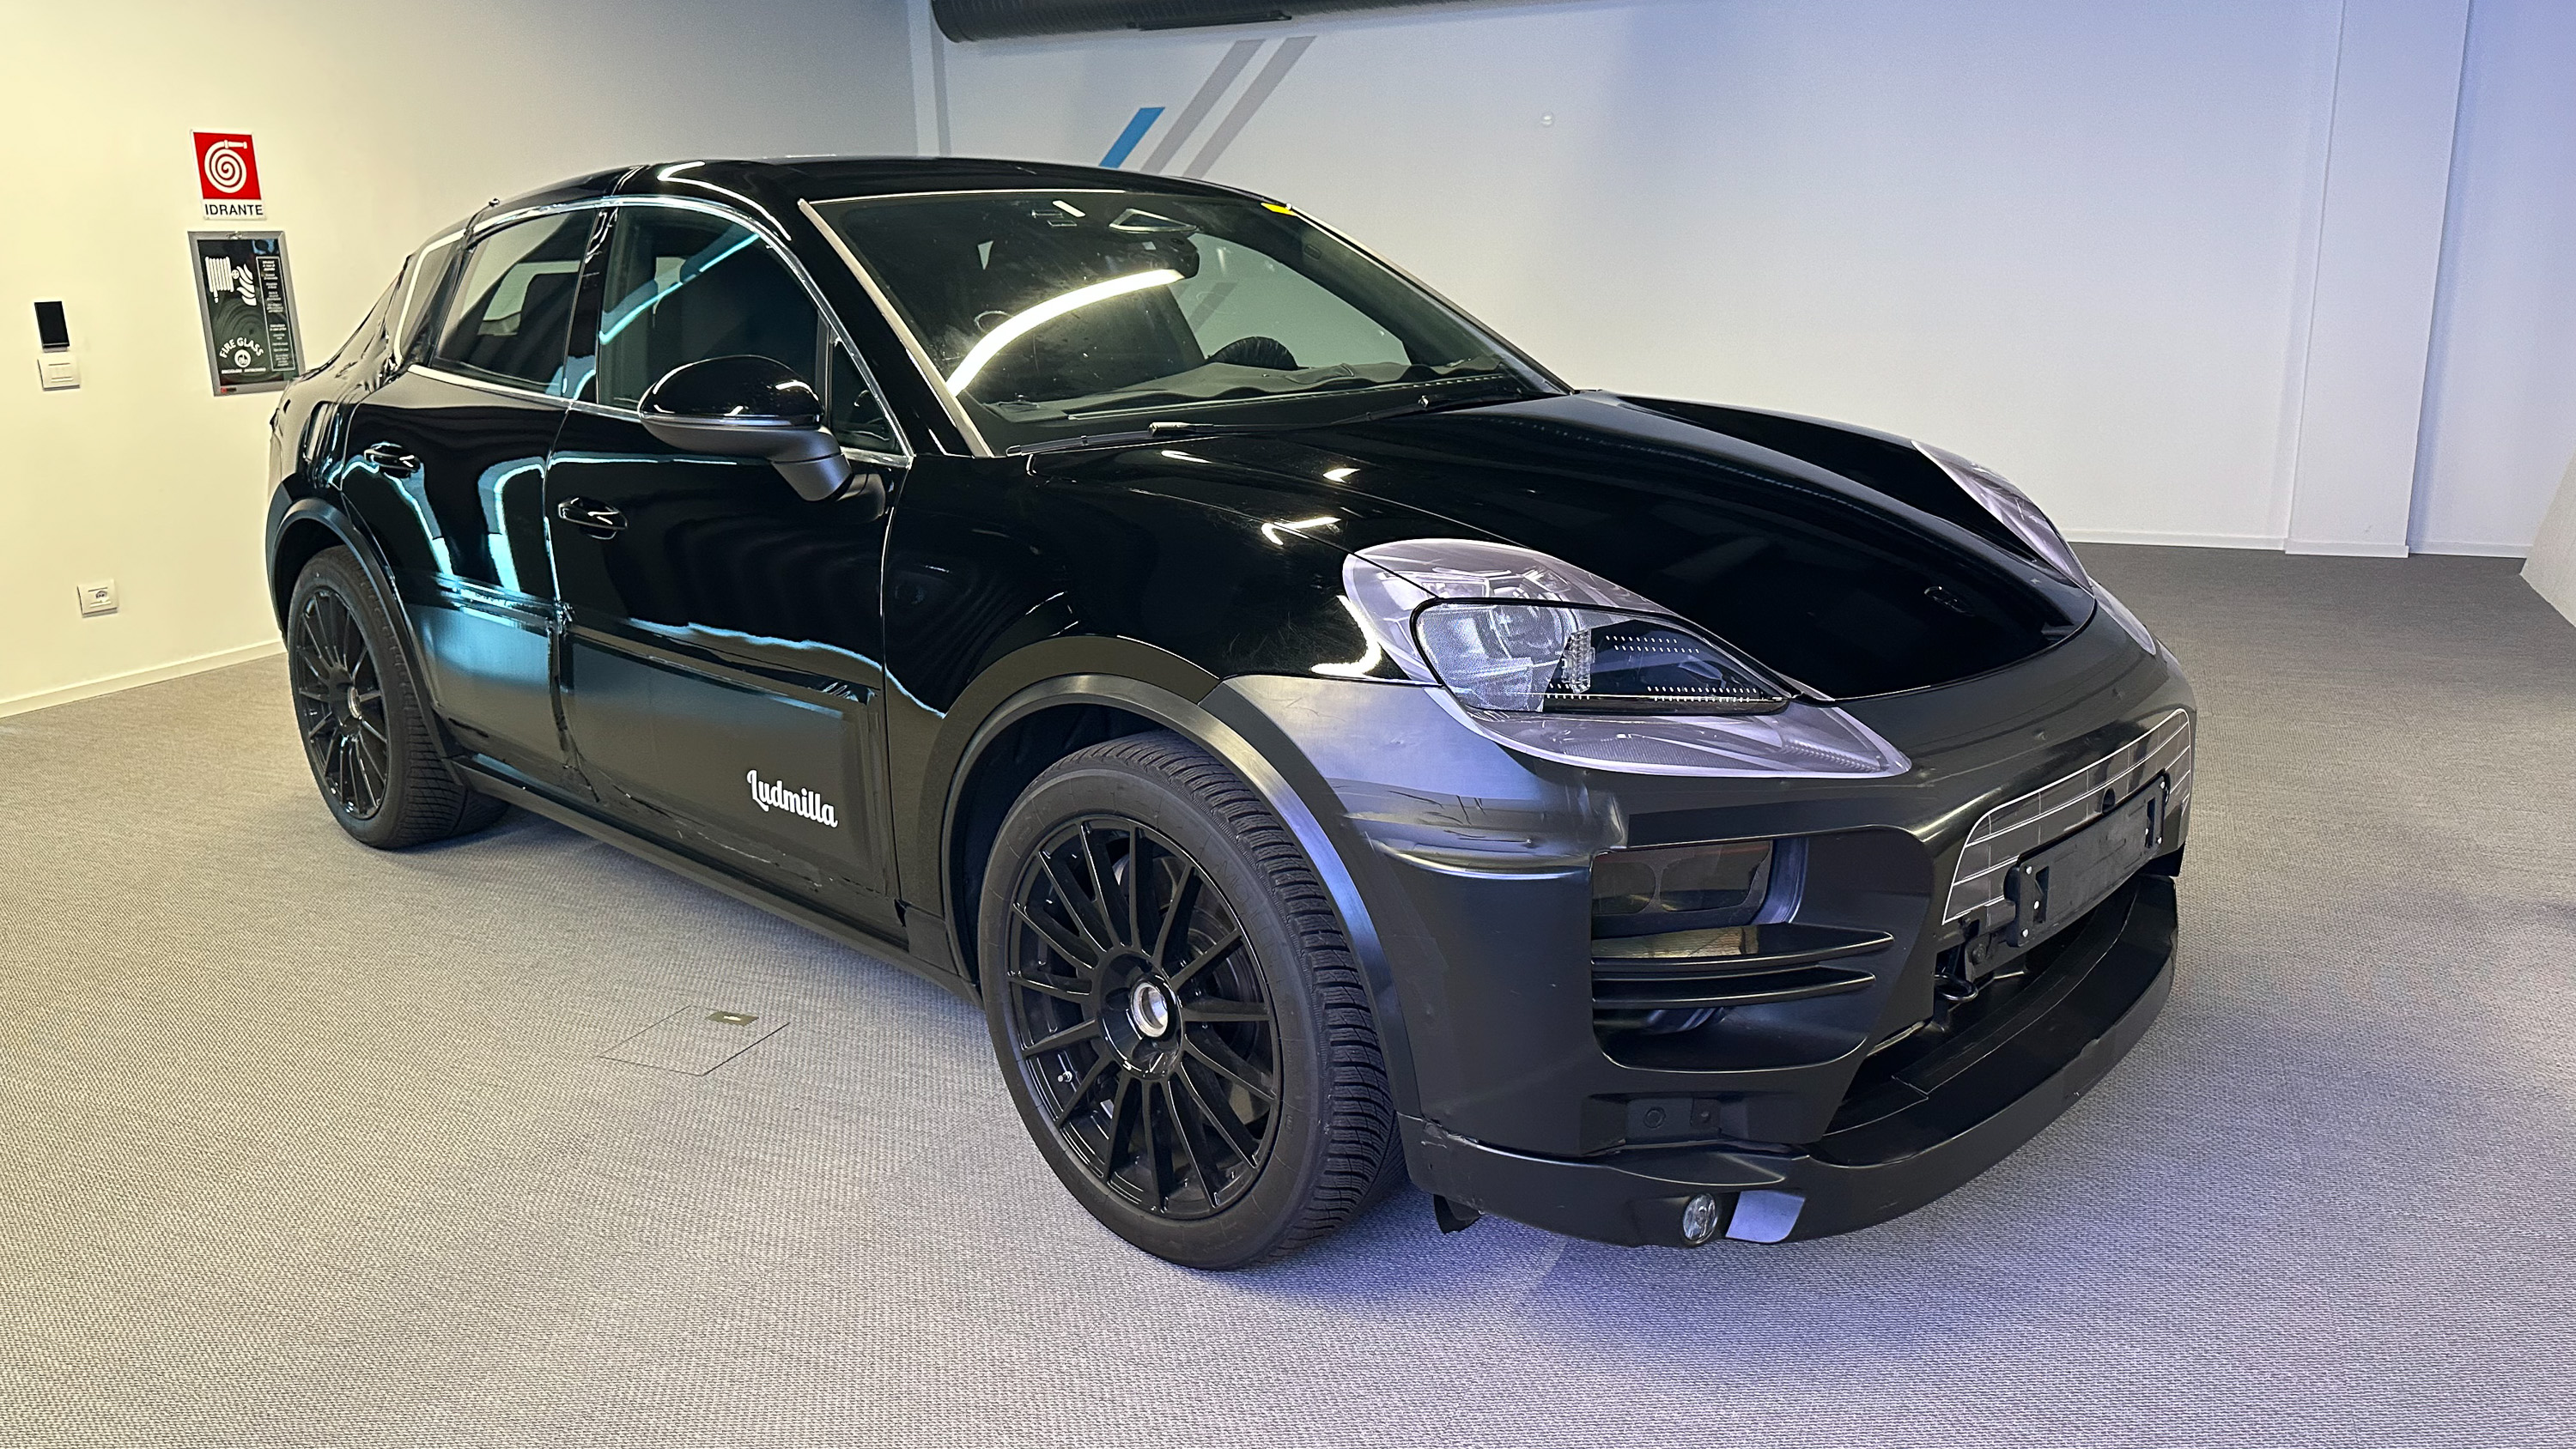 Electric Porsche Macan: here's your first look at the upcoming SUV